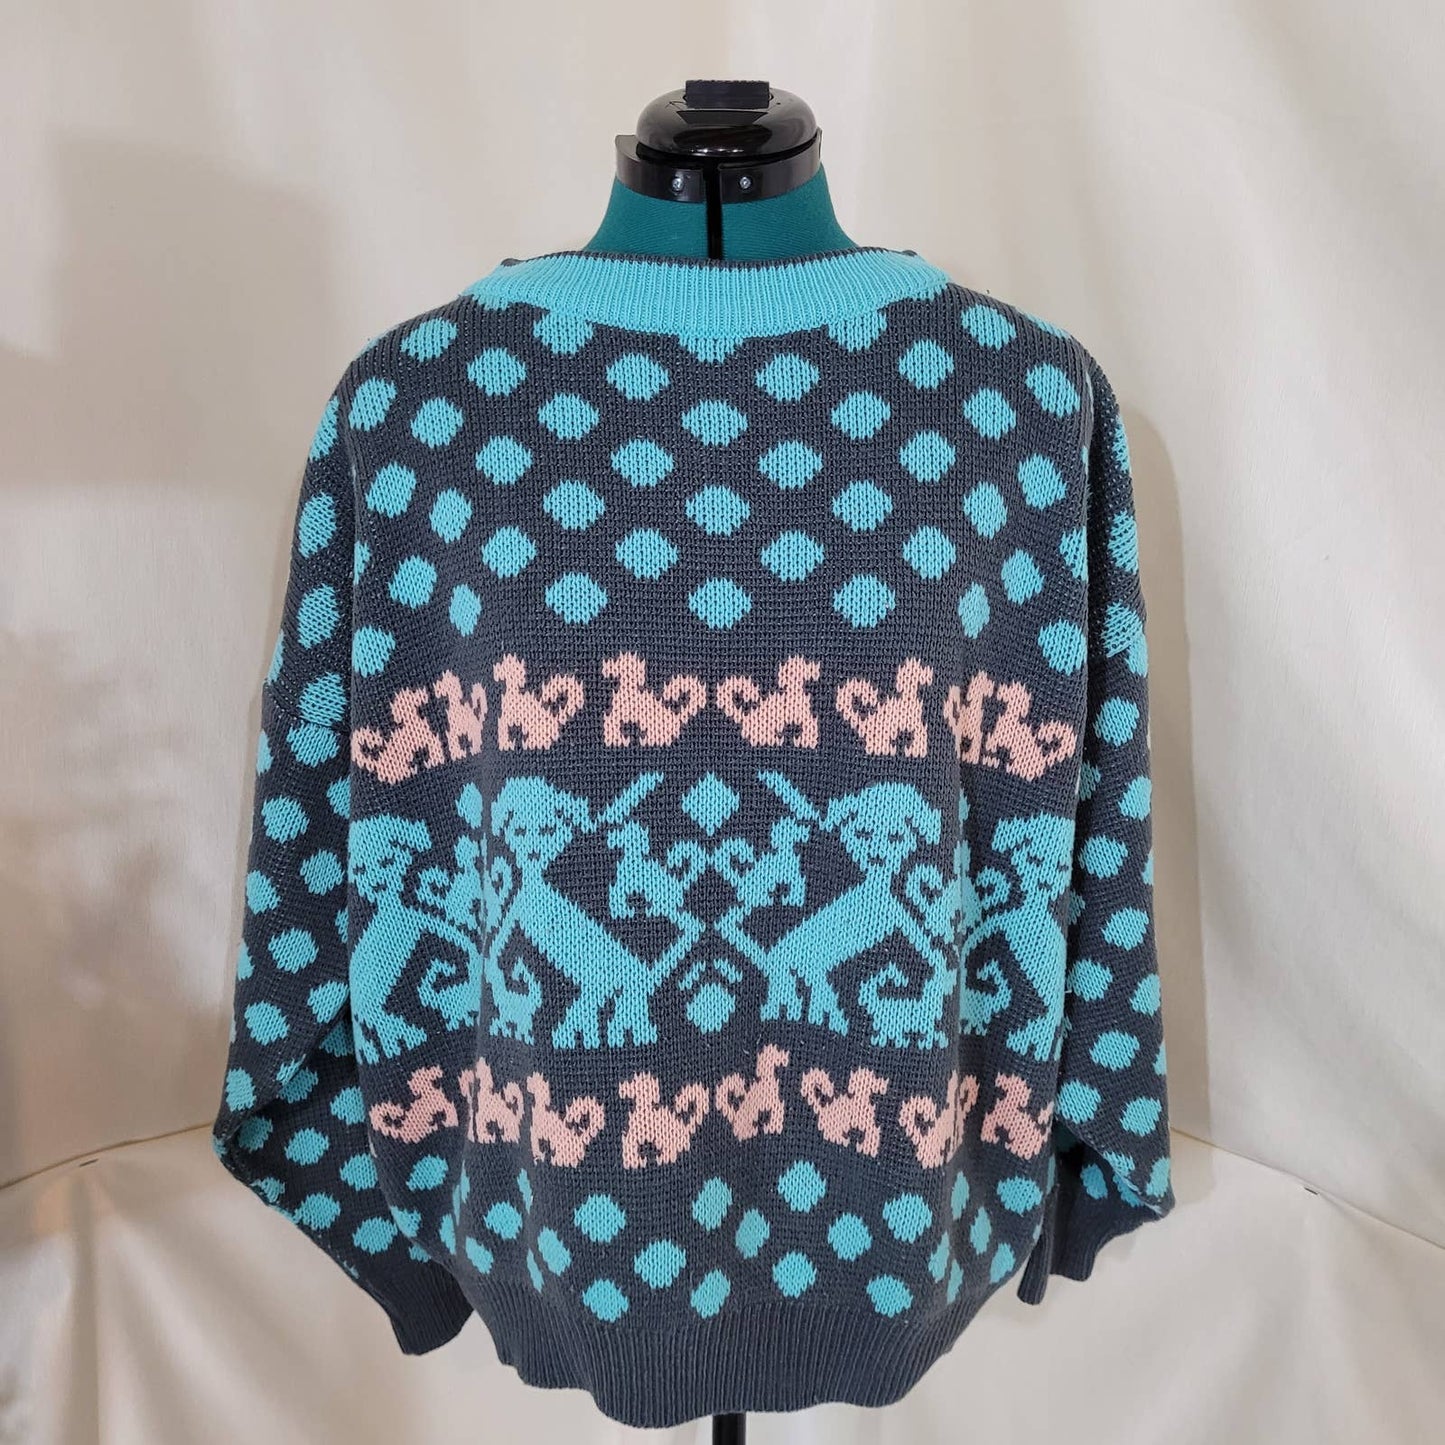 Vintage 80s 90s Kaos Blue Polka Dot Sweater with Dogs - Size Medium